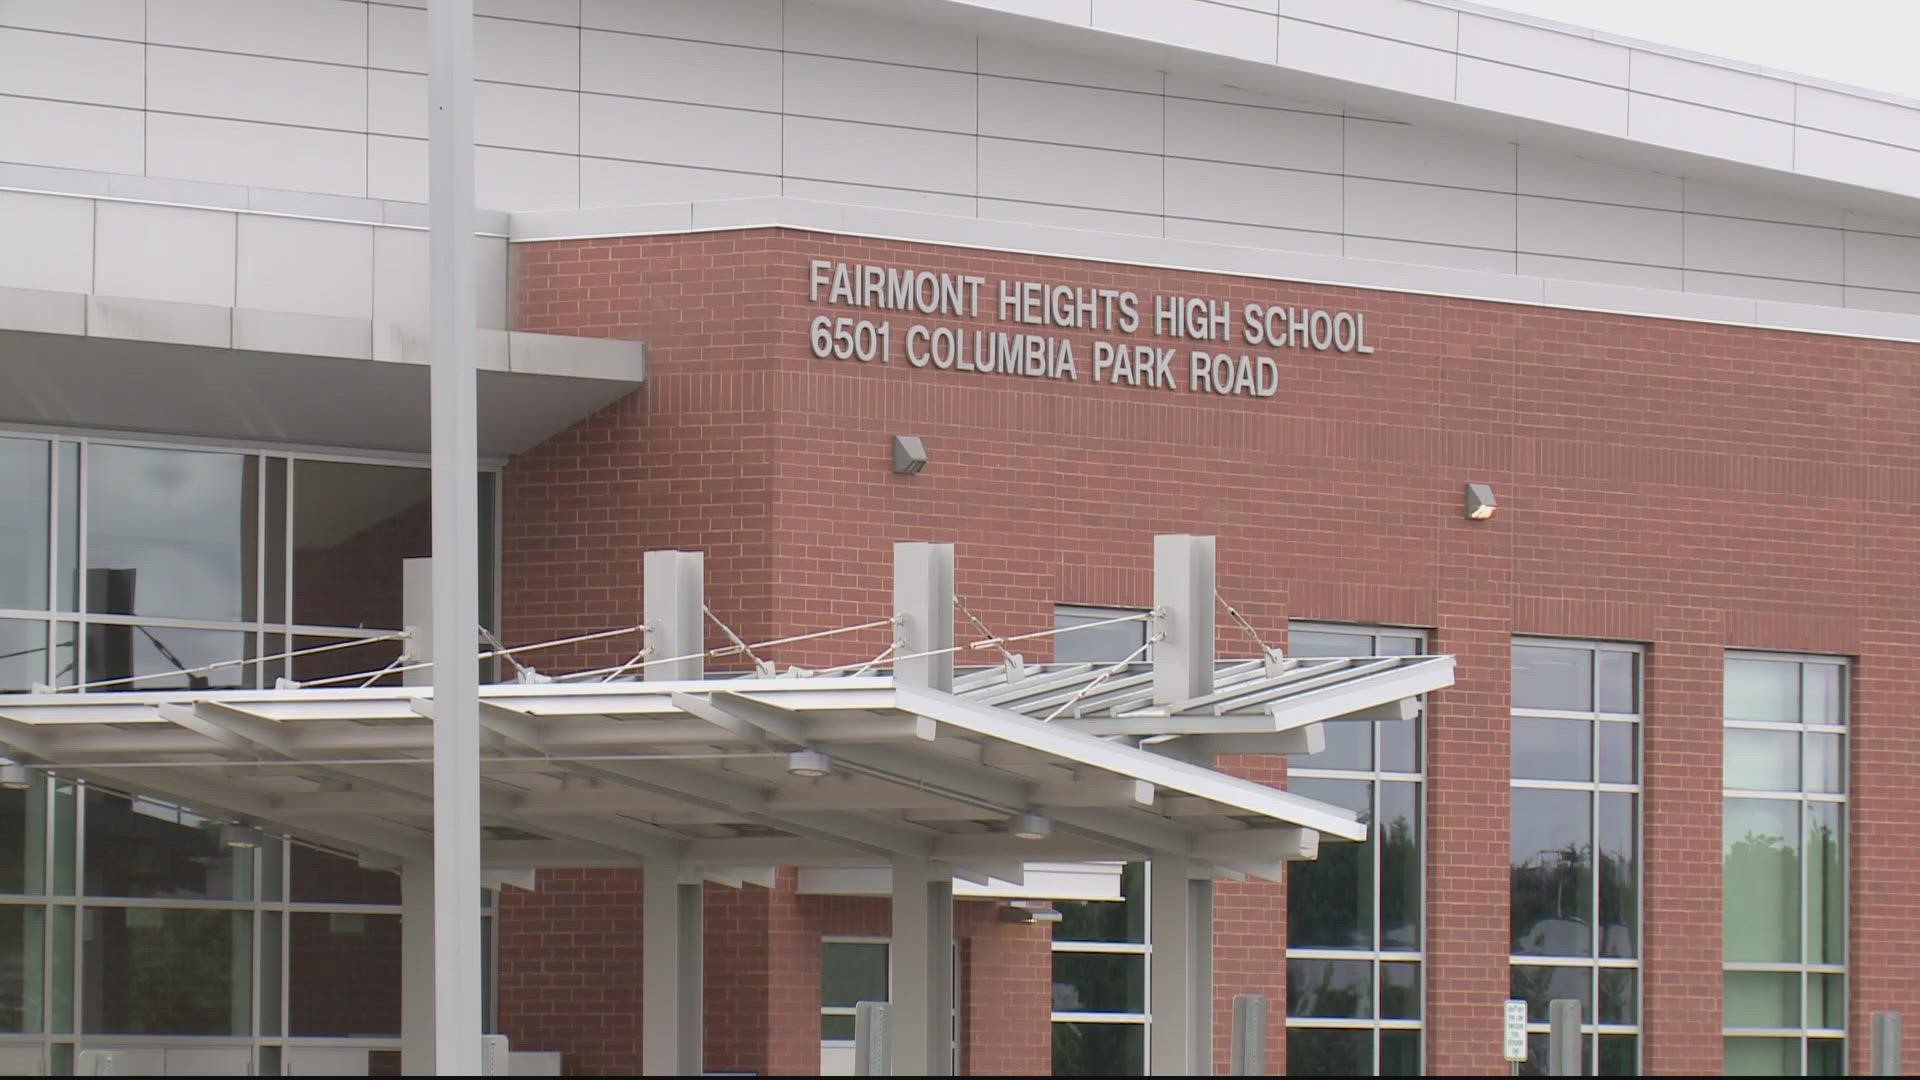 Fairmont Heights High School was placed on lockdown after reports that a student had a gun in class, the Prince George's County Police Department said.